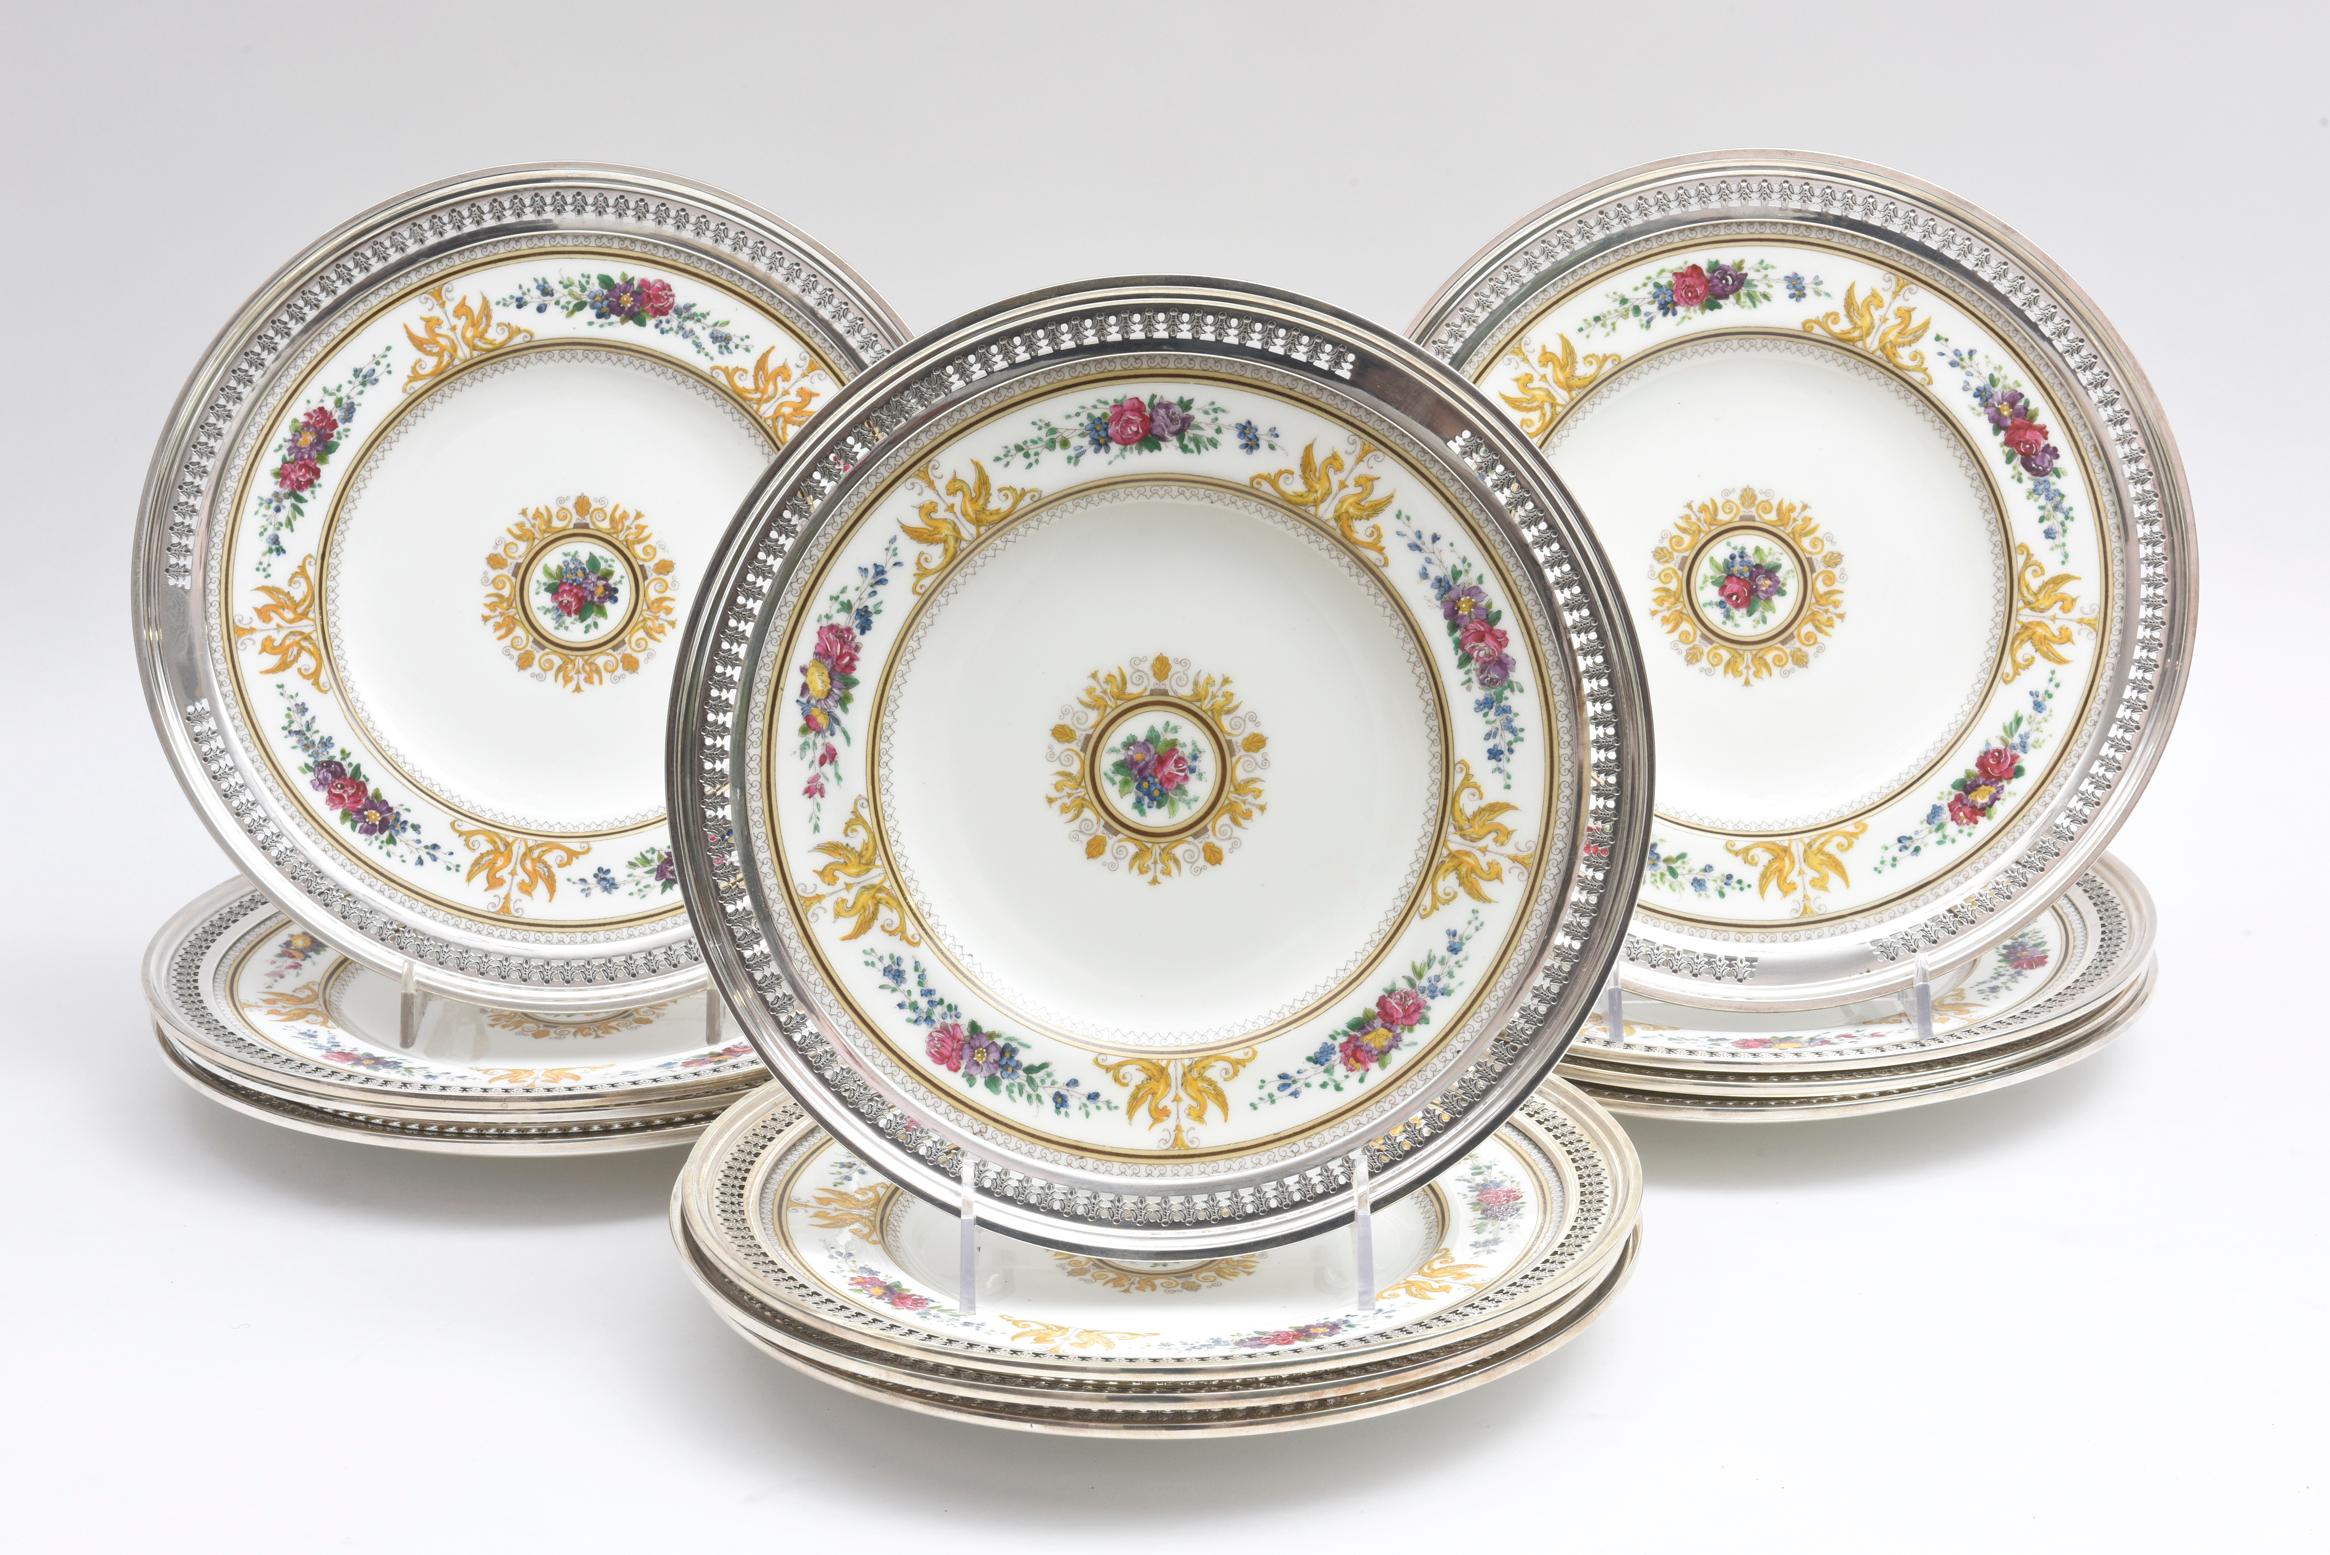 Hand-Crafted Wedgwood Porcelain & Sterling Silver Dessert Service, 12 Plates & 1 Pastry Plate